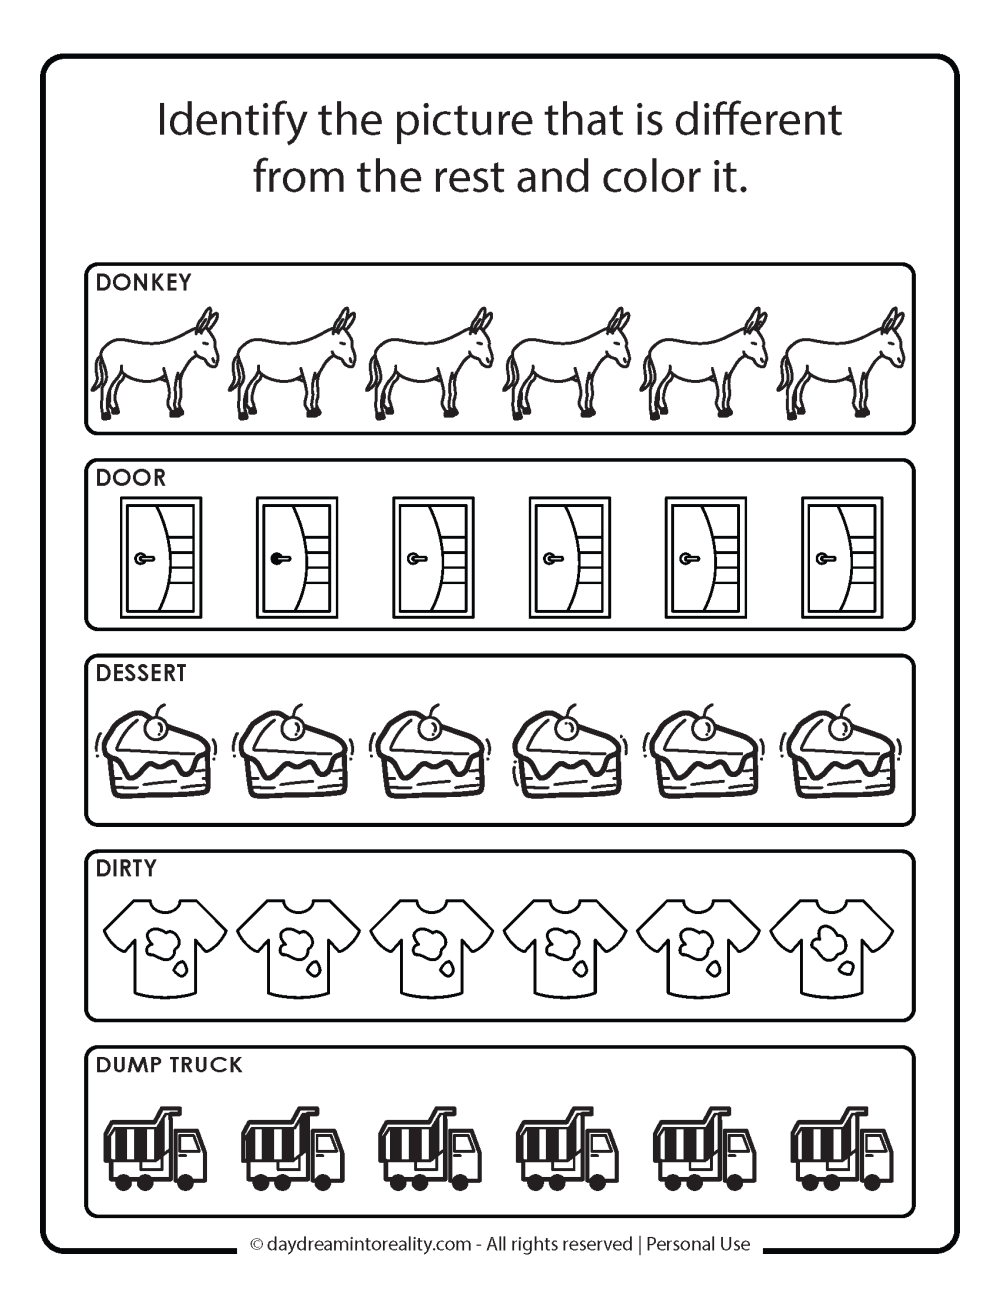 Letter D worksheet free printables. Identify the different picture.